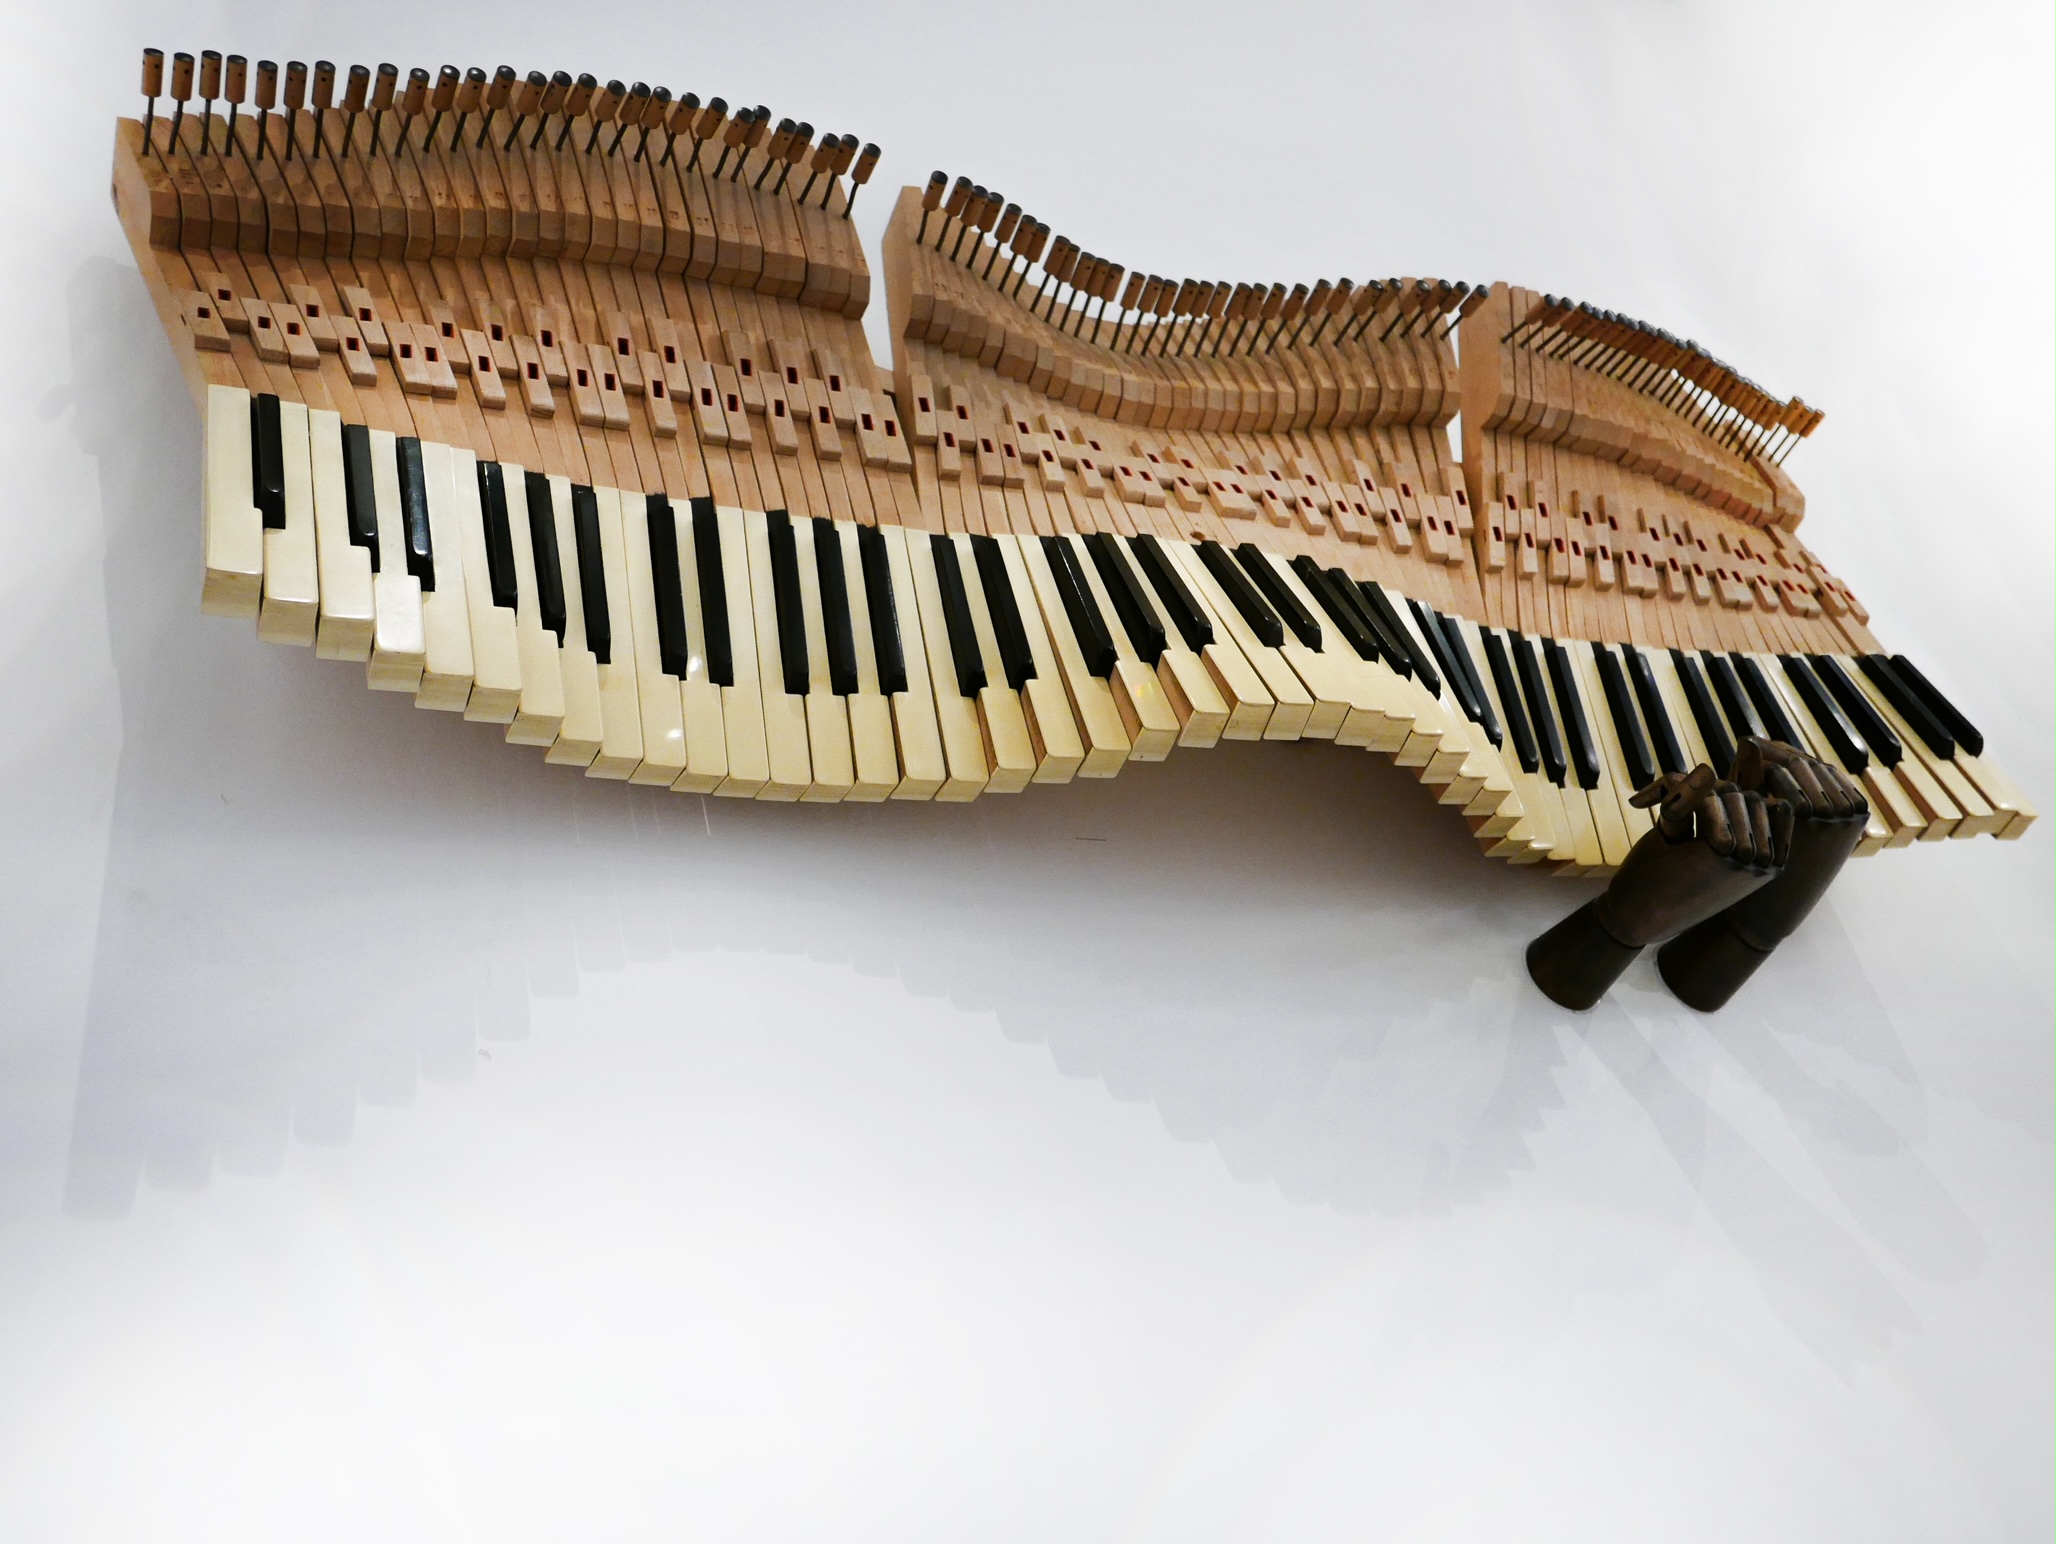 Wall art decor made from the keys of an old piano